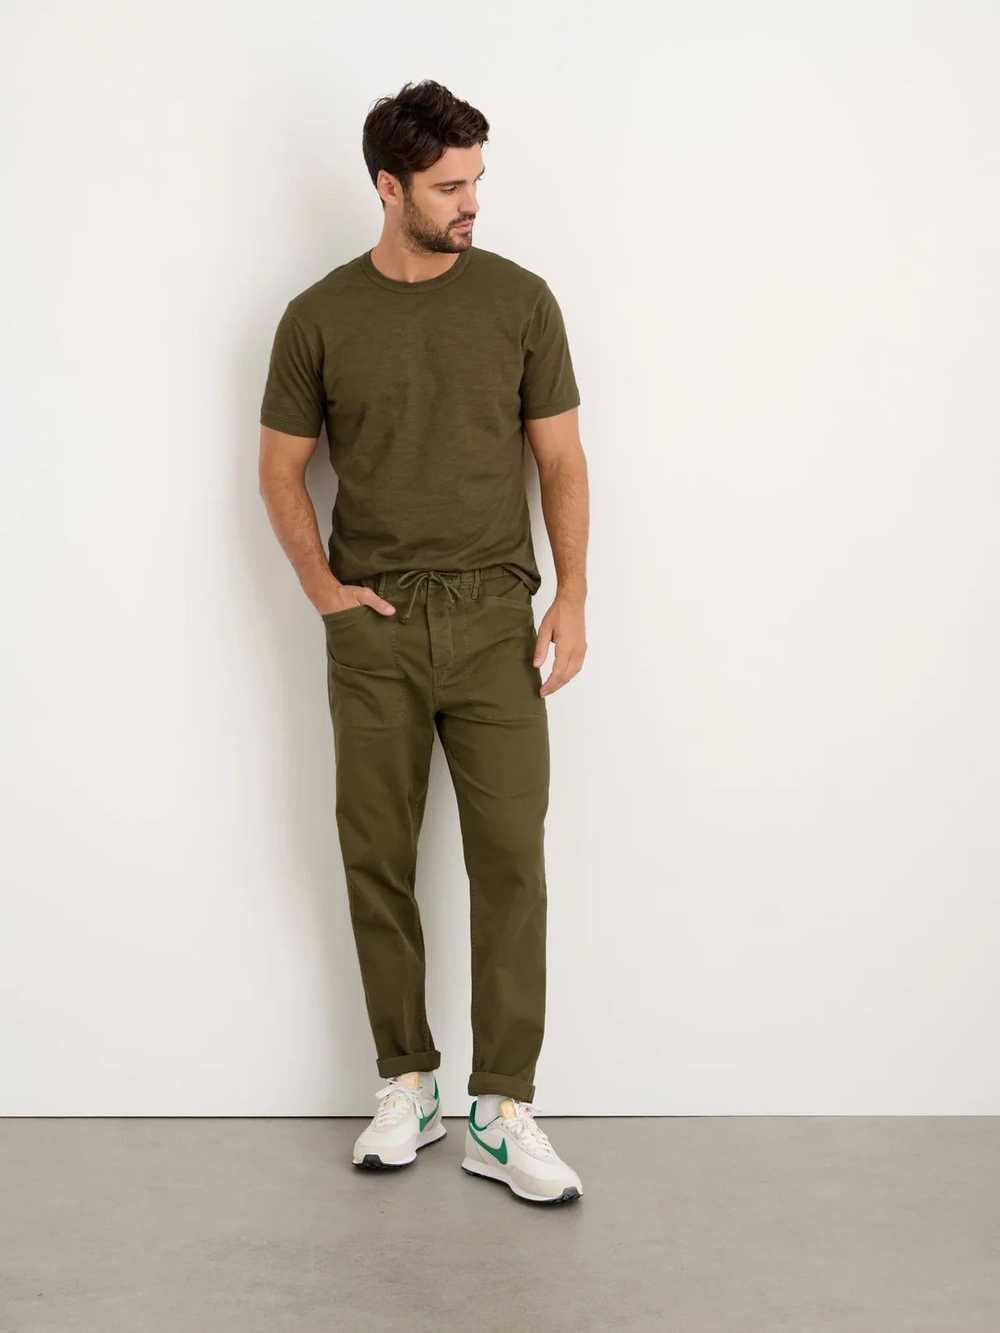 Alex Mill Olive Pull-On Button Fly Pant - image 1